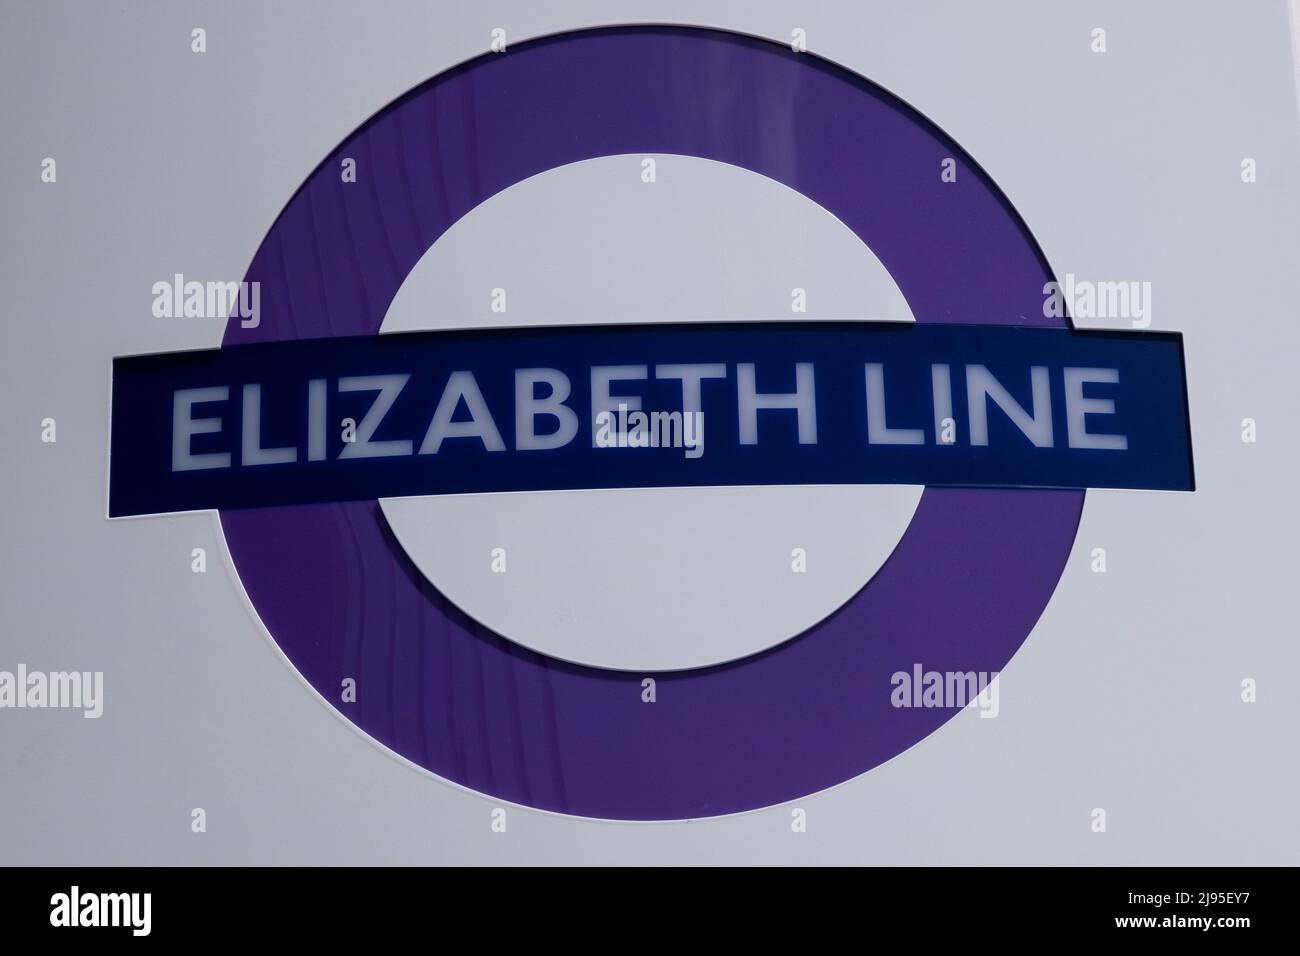 Sign outside Stratford station for the Elizabeth Line on 18th May 2022 in London, United Kingdom. The Elizabeth line is to run services on Crossrail in Central London and to the west along the Great Western Main Line; and east along the Great Eastern Main Line. The the line will open to the public on 24th May 2022. The project has been subject to long delays, originally supposed to open in December 2018, and is vastly over budget by £4bn. Stock Photo